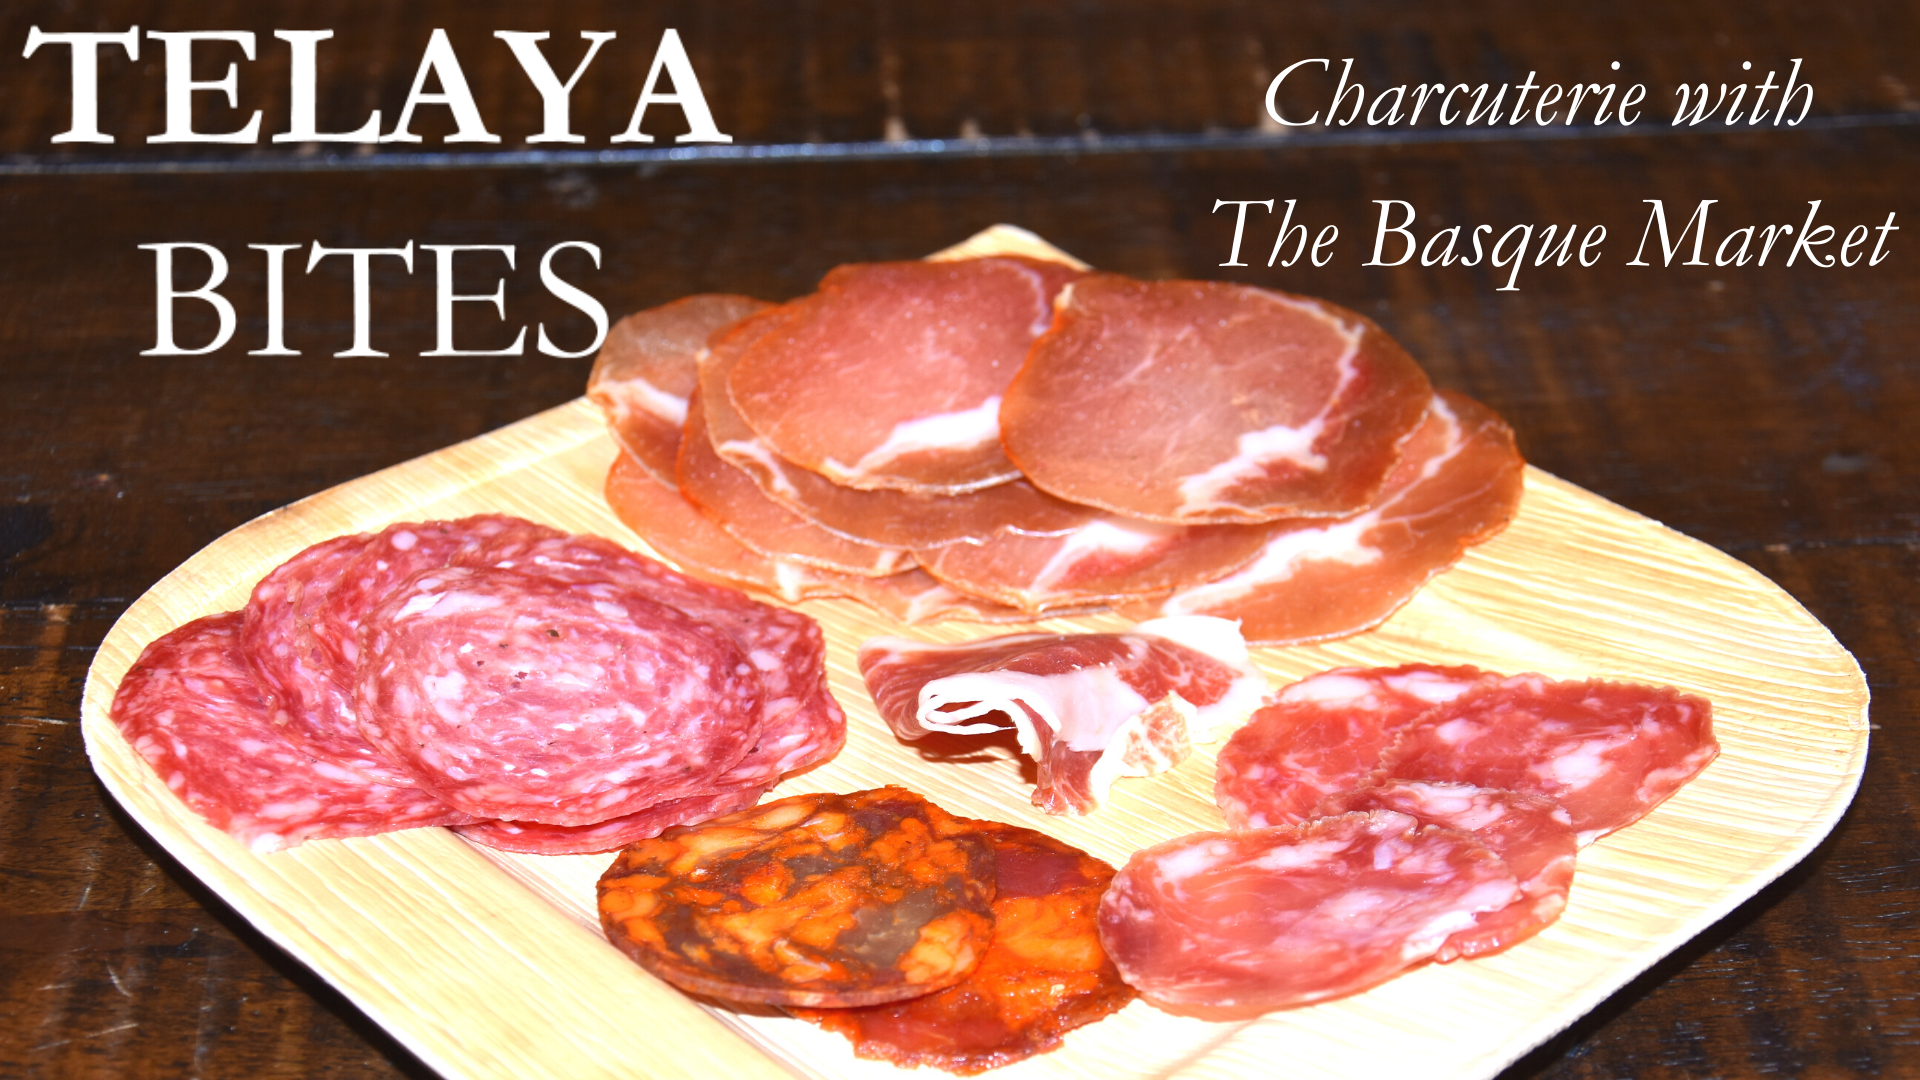 Telaya Bites: Charcuterie with The Basque Market